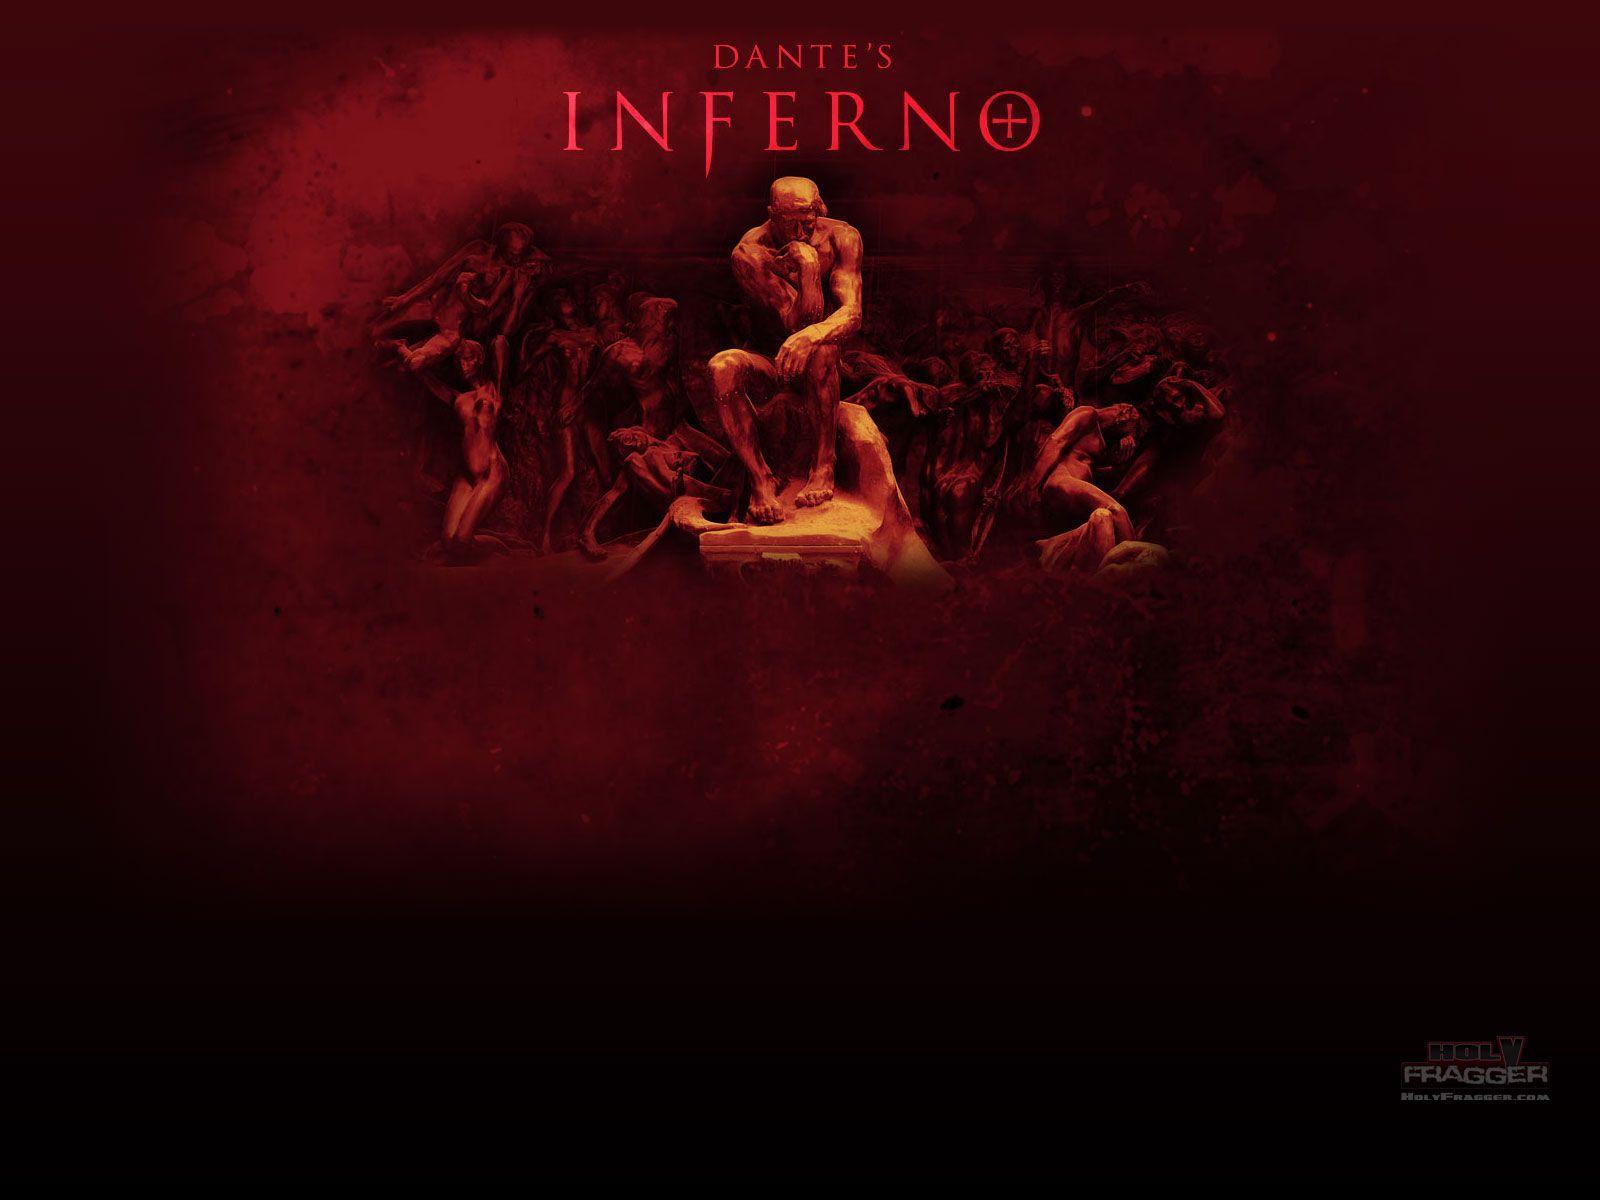 Inferno Gallery of Wallpaper. Free Download For Android